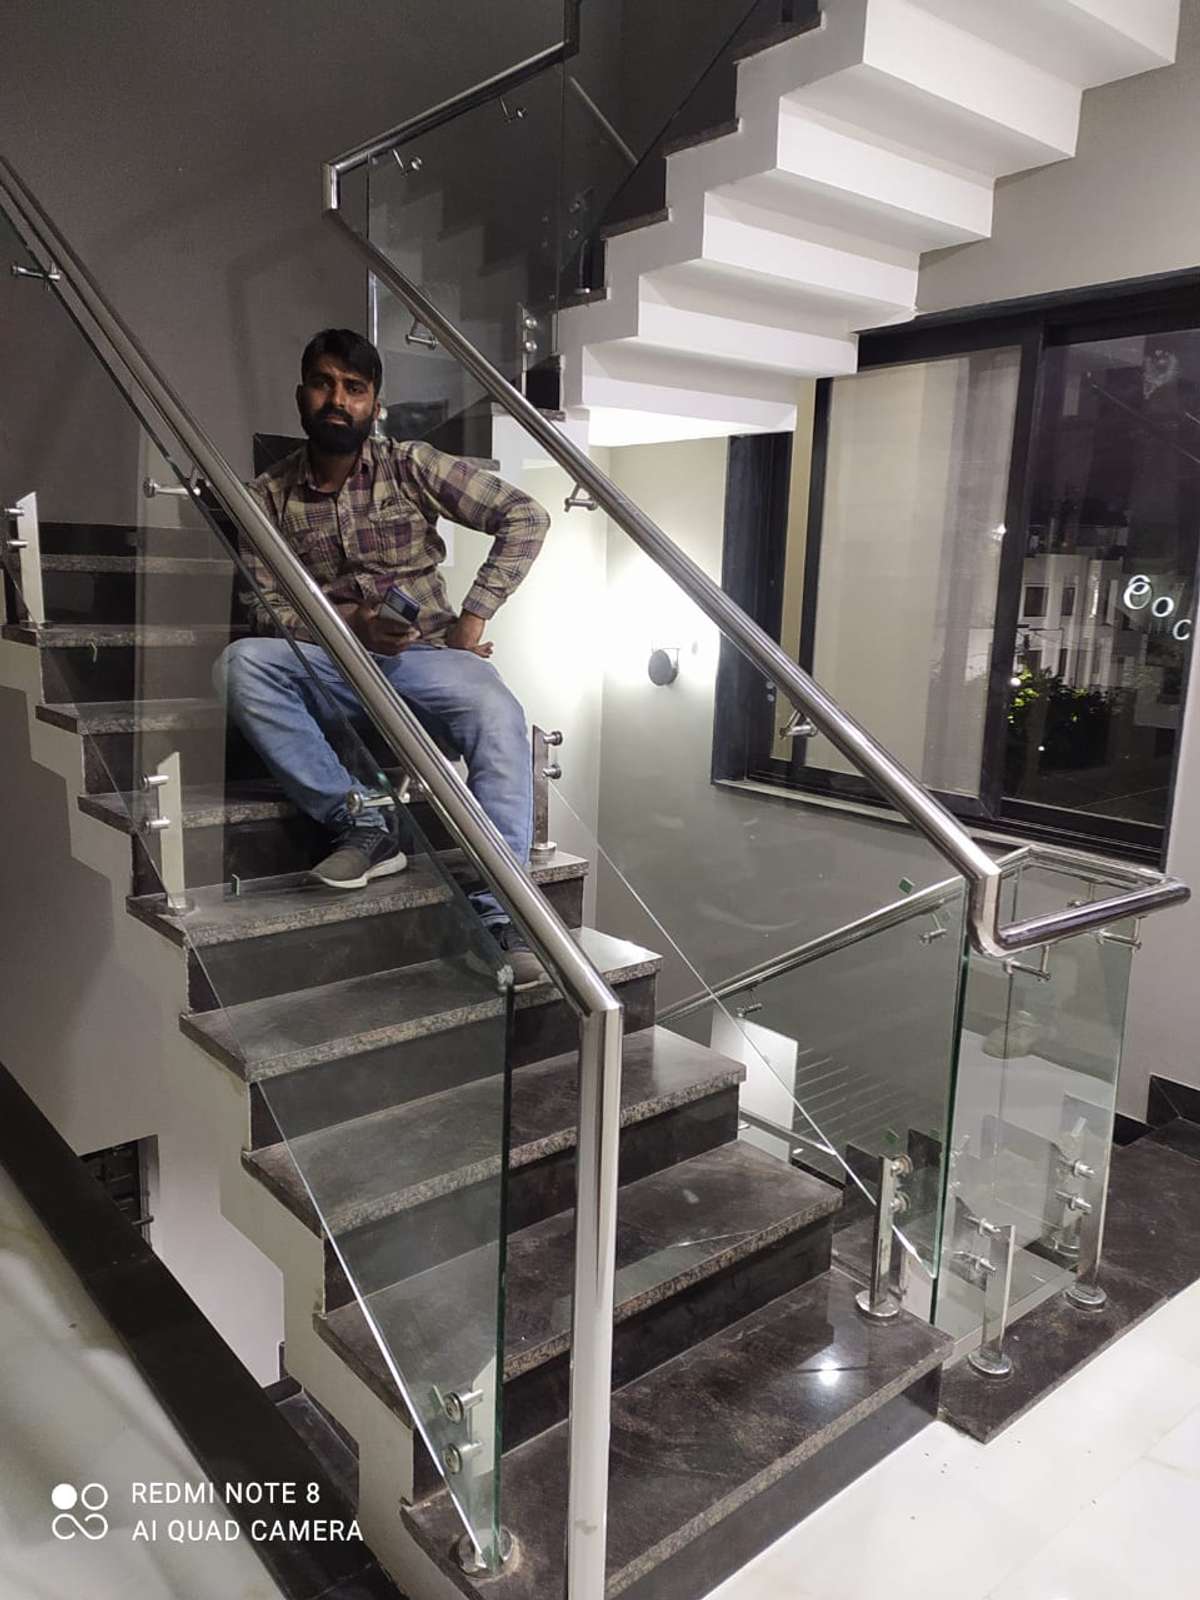 stair relling 
Contact me-7693066707
ER. Sameer mansuri
Interior Exteriar include all working 
(construction, design, dwaring, tile, eletricity, plumbing, Alluminium all type, Febrication all type, Paint all type, wallpapers, etc.)
 #StaircaseDecors  #GlassHandRailStaircase #LShapedStaircase #StraightStaircase  #StaircasePaintings #StaircaseIdeas  #CurvedStaircase